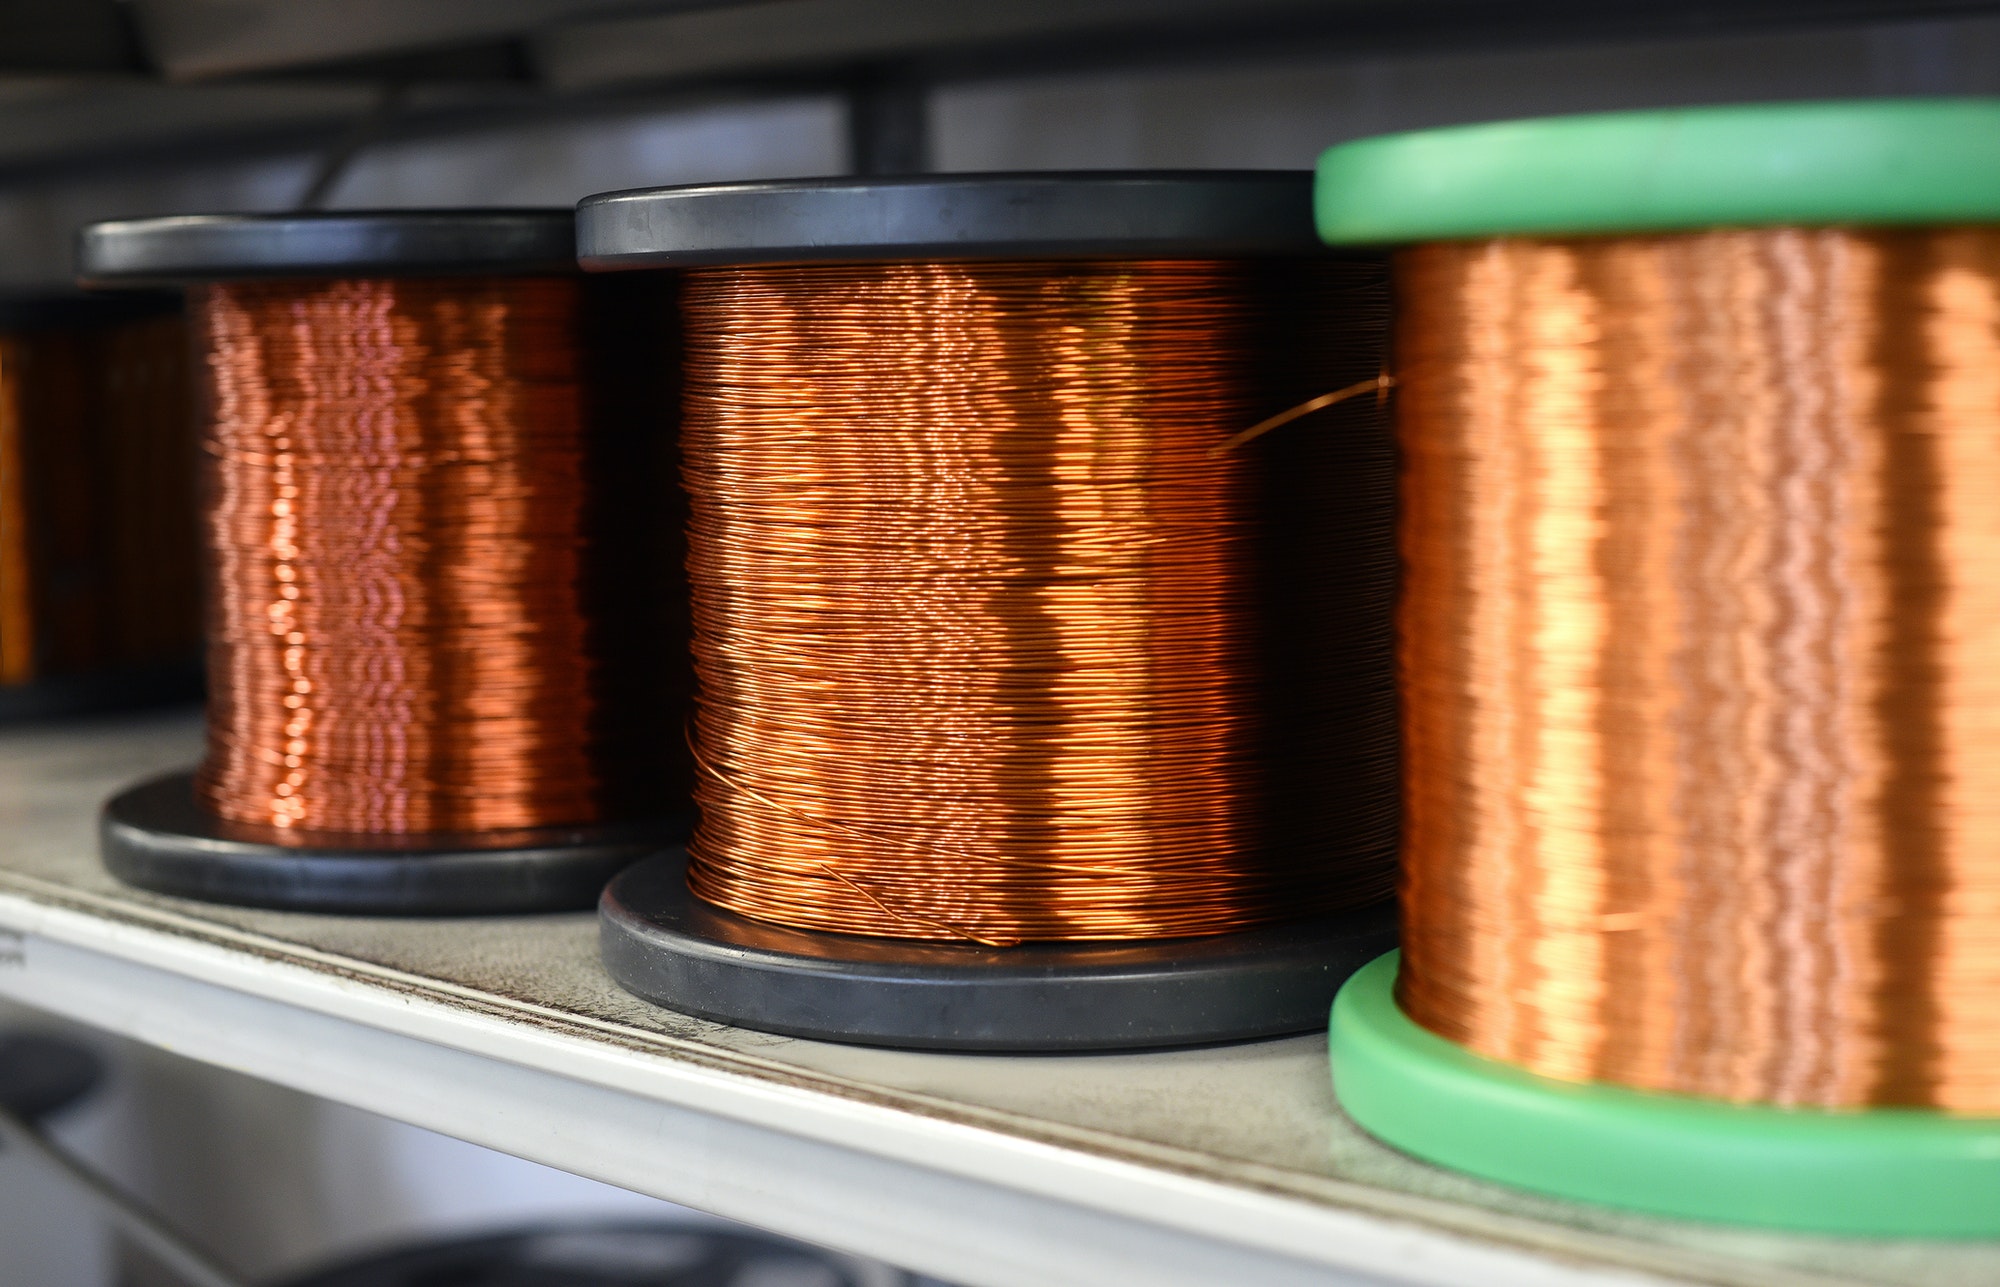 Row of copper wire coils in close up view